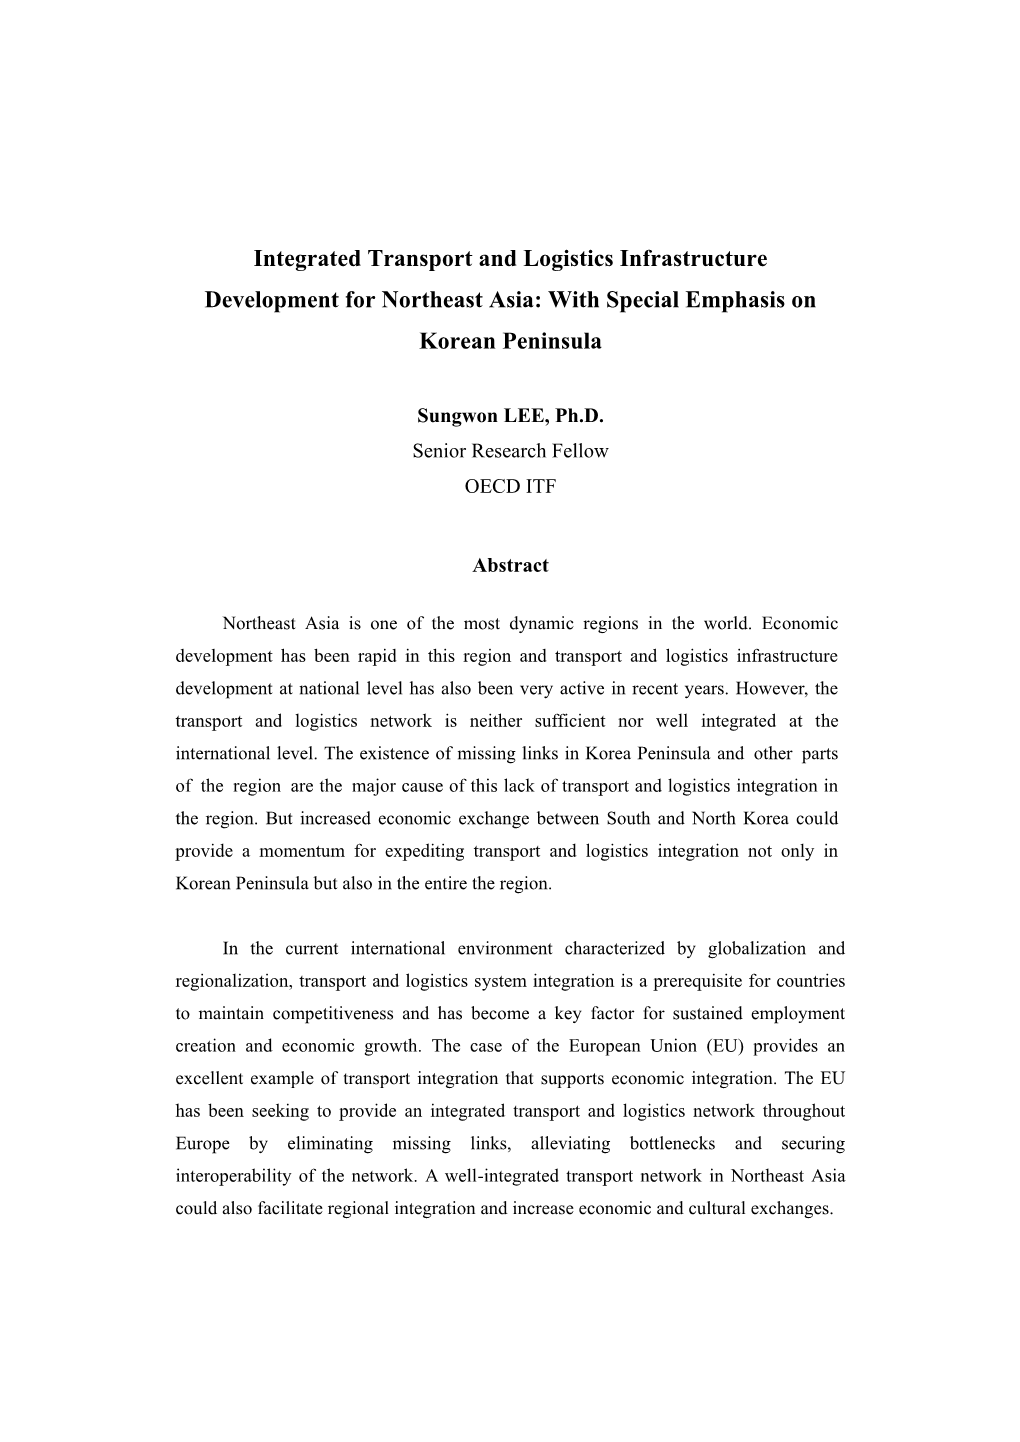 Integrated Transport and Logistics Infrastructure Development for Northeast Asia: with Special Emphasis on Korean Peninsula